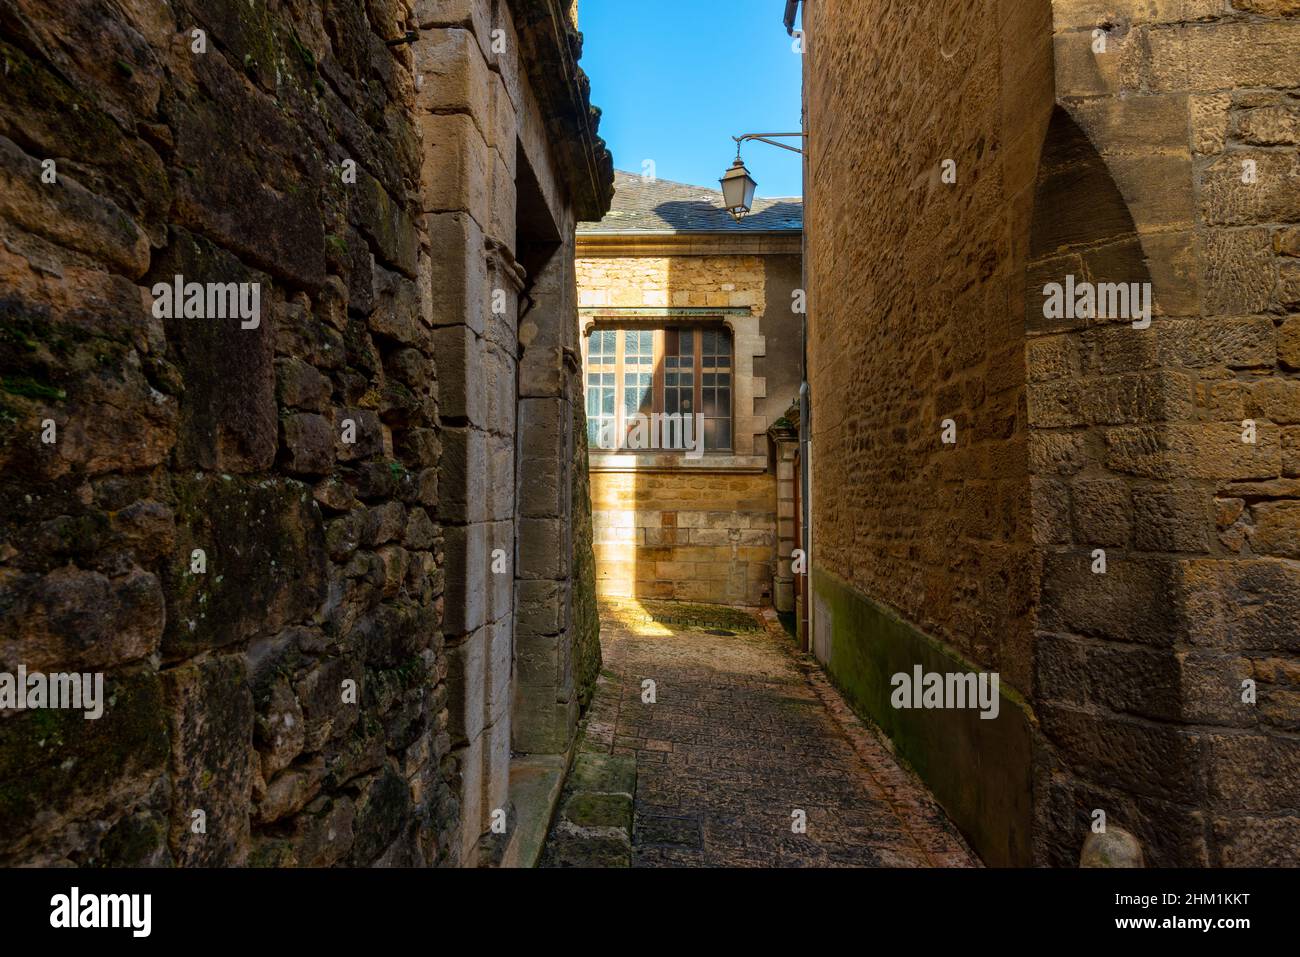 The narrow street of a beautiful french yellow stone medieval town of Sarlat-la-Caneda located in Perigord, France, taken on a sunny autumn afternoon Stock Photo